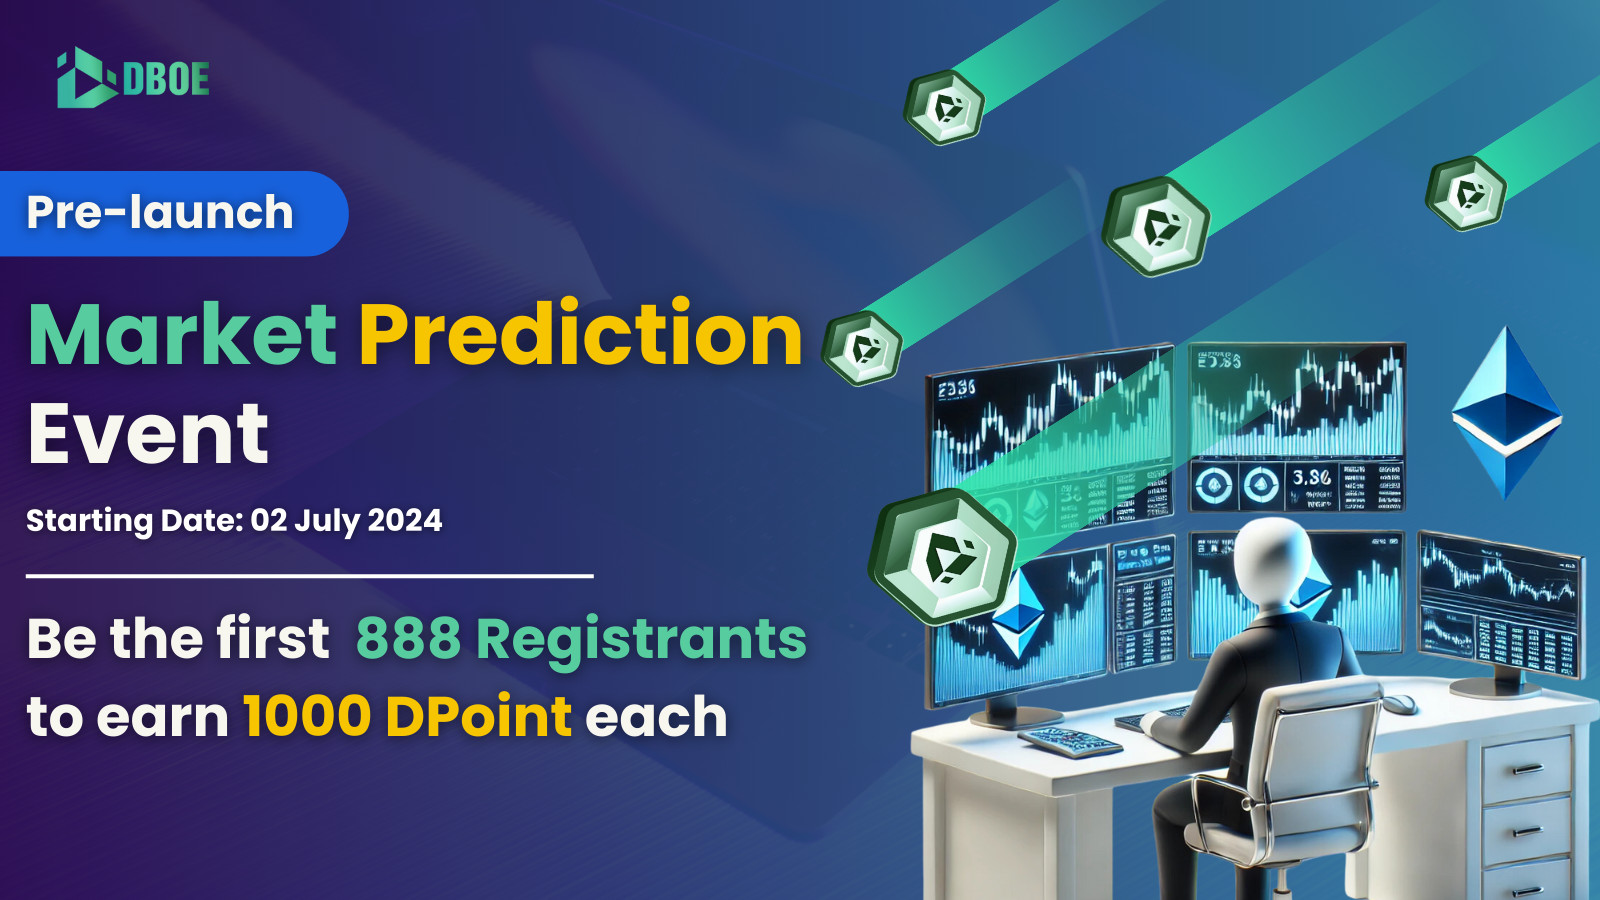 Pre-launch Market Prediction: Earn 1000 D-Points Per One Early Registration